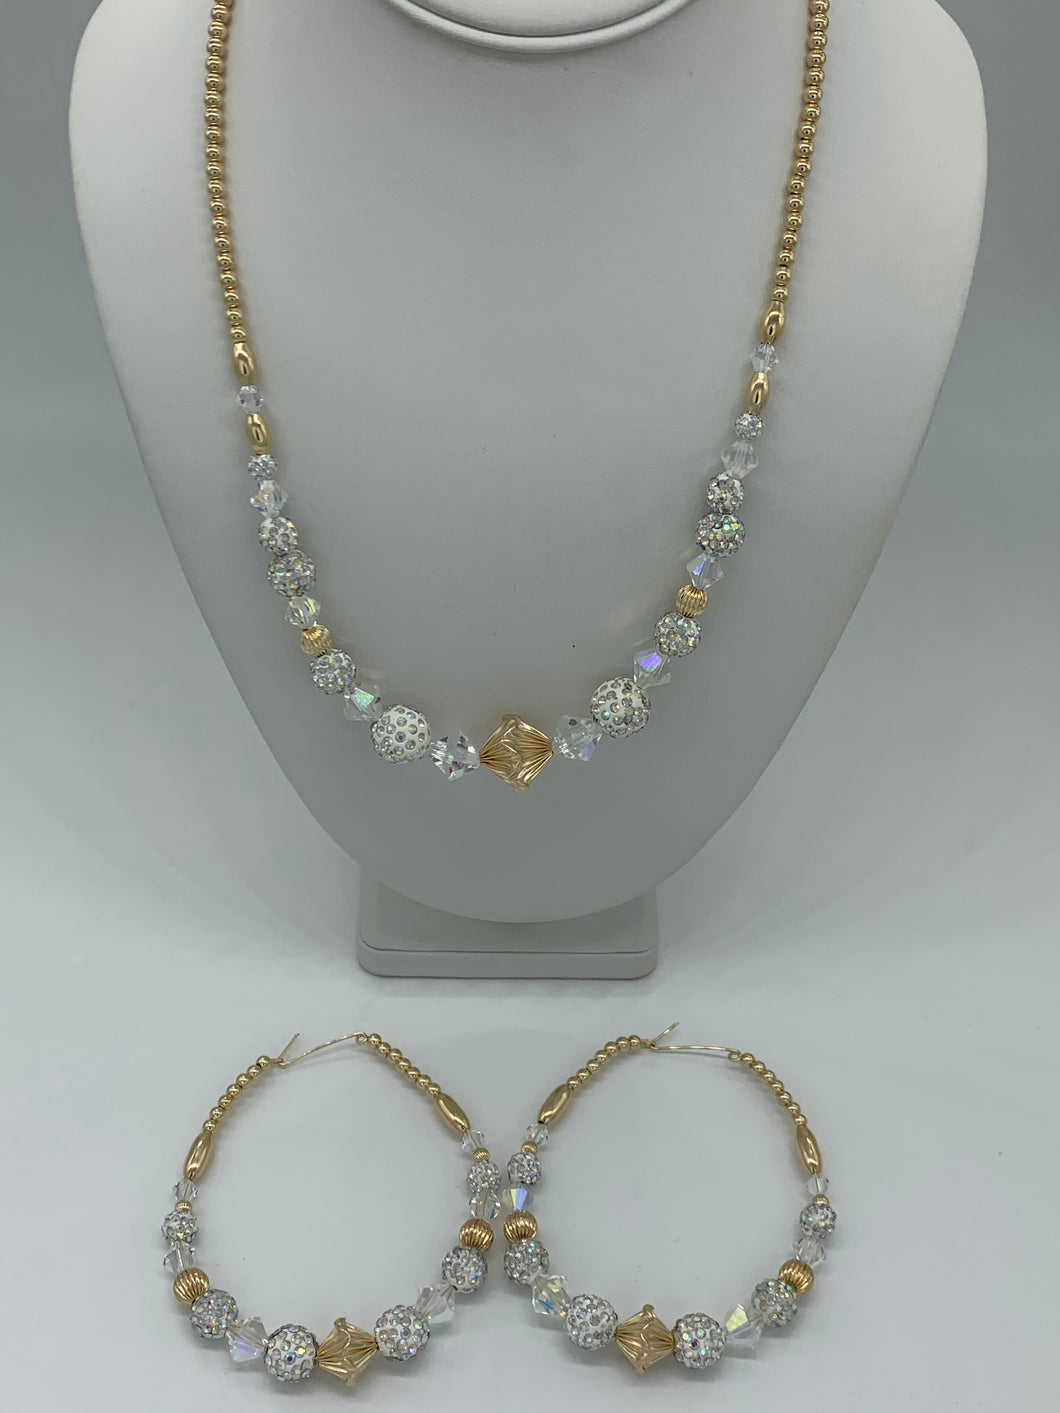 Gold Filled Necklace and Large Earrings Set with Shambella Beads and Crystals